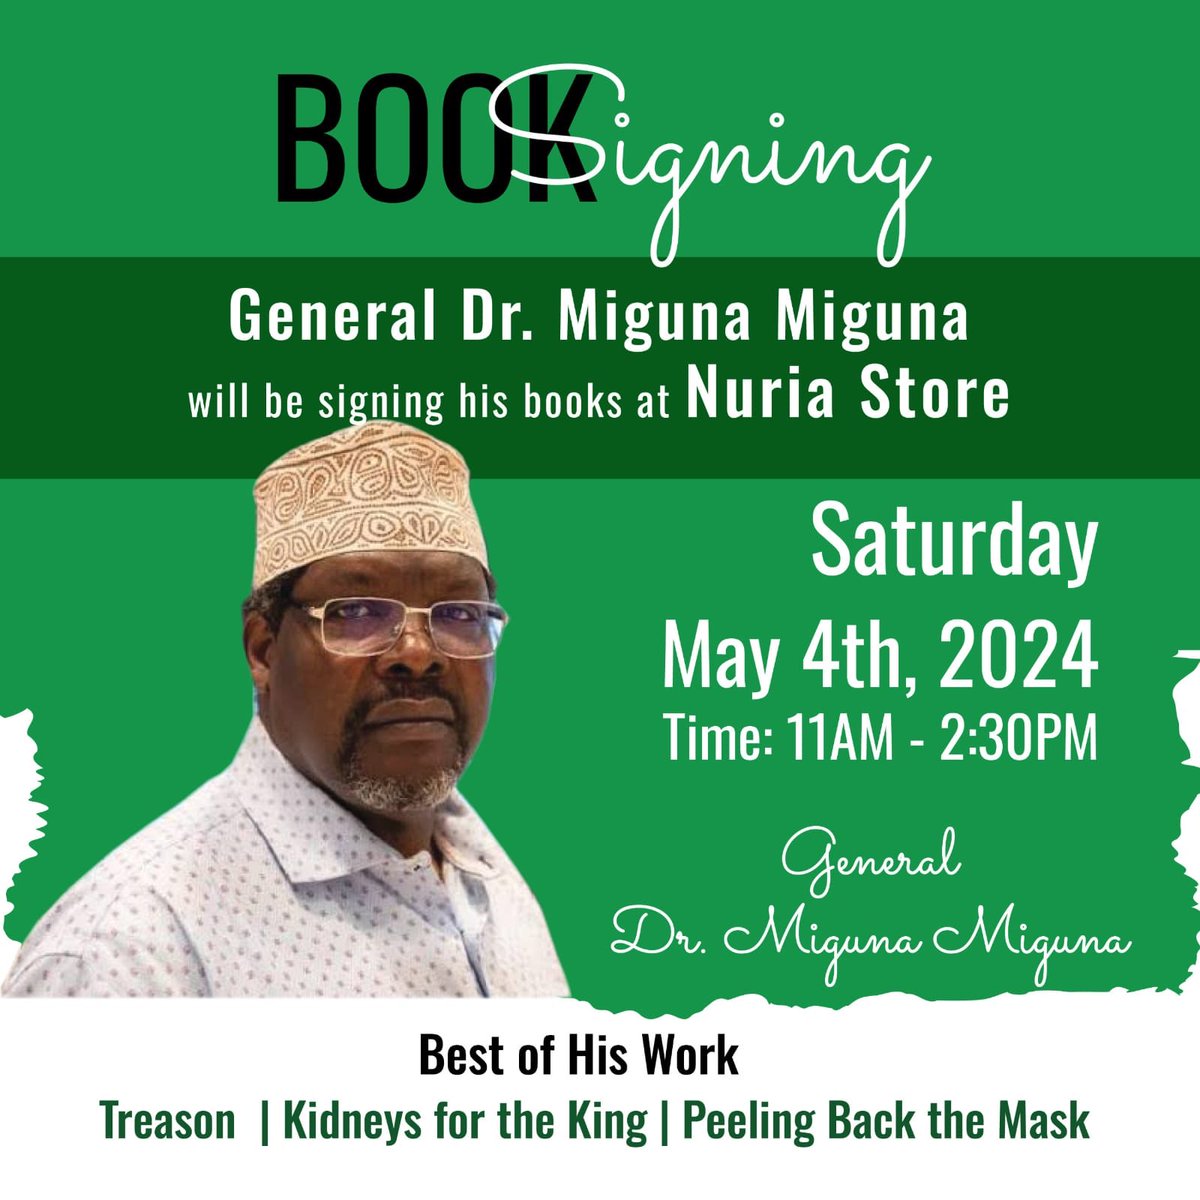 Join us at @NuriaStore on May 4th, 2024! 11AM-2:30PM. General Dr. @MigunaMiguna will be signing his best works: Treason, Kidneys for the King, and Peeling Back the Mask. Don't miss this exclusive opportunity! nuriakenya.com/?s=Miguna+Migu…